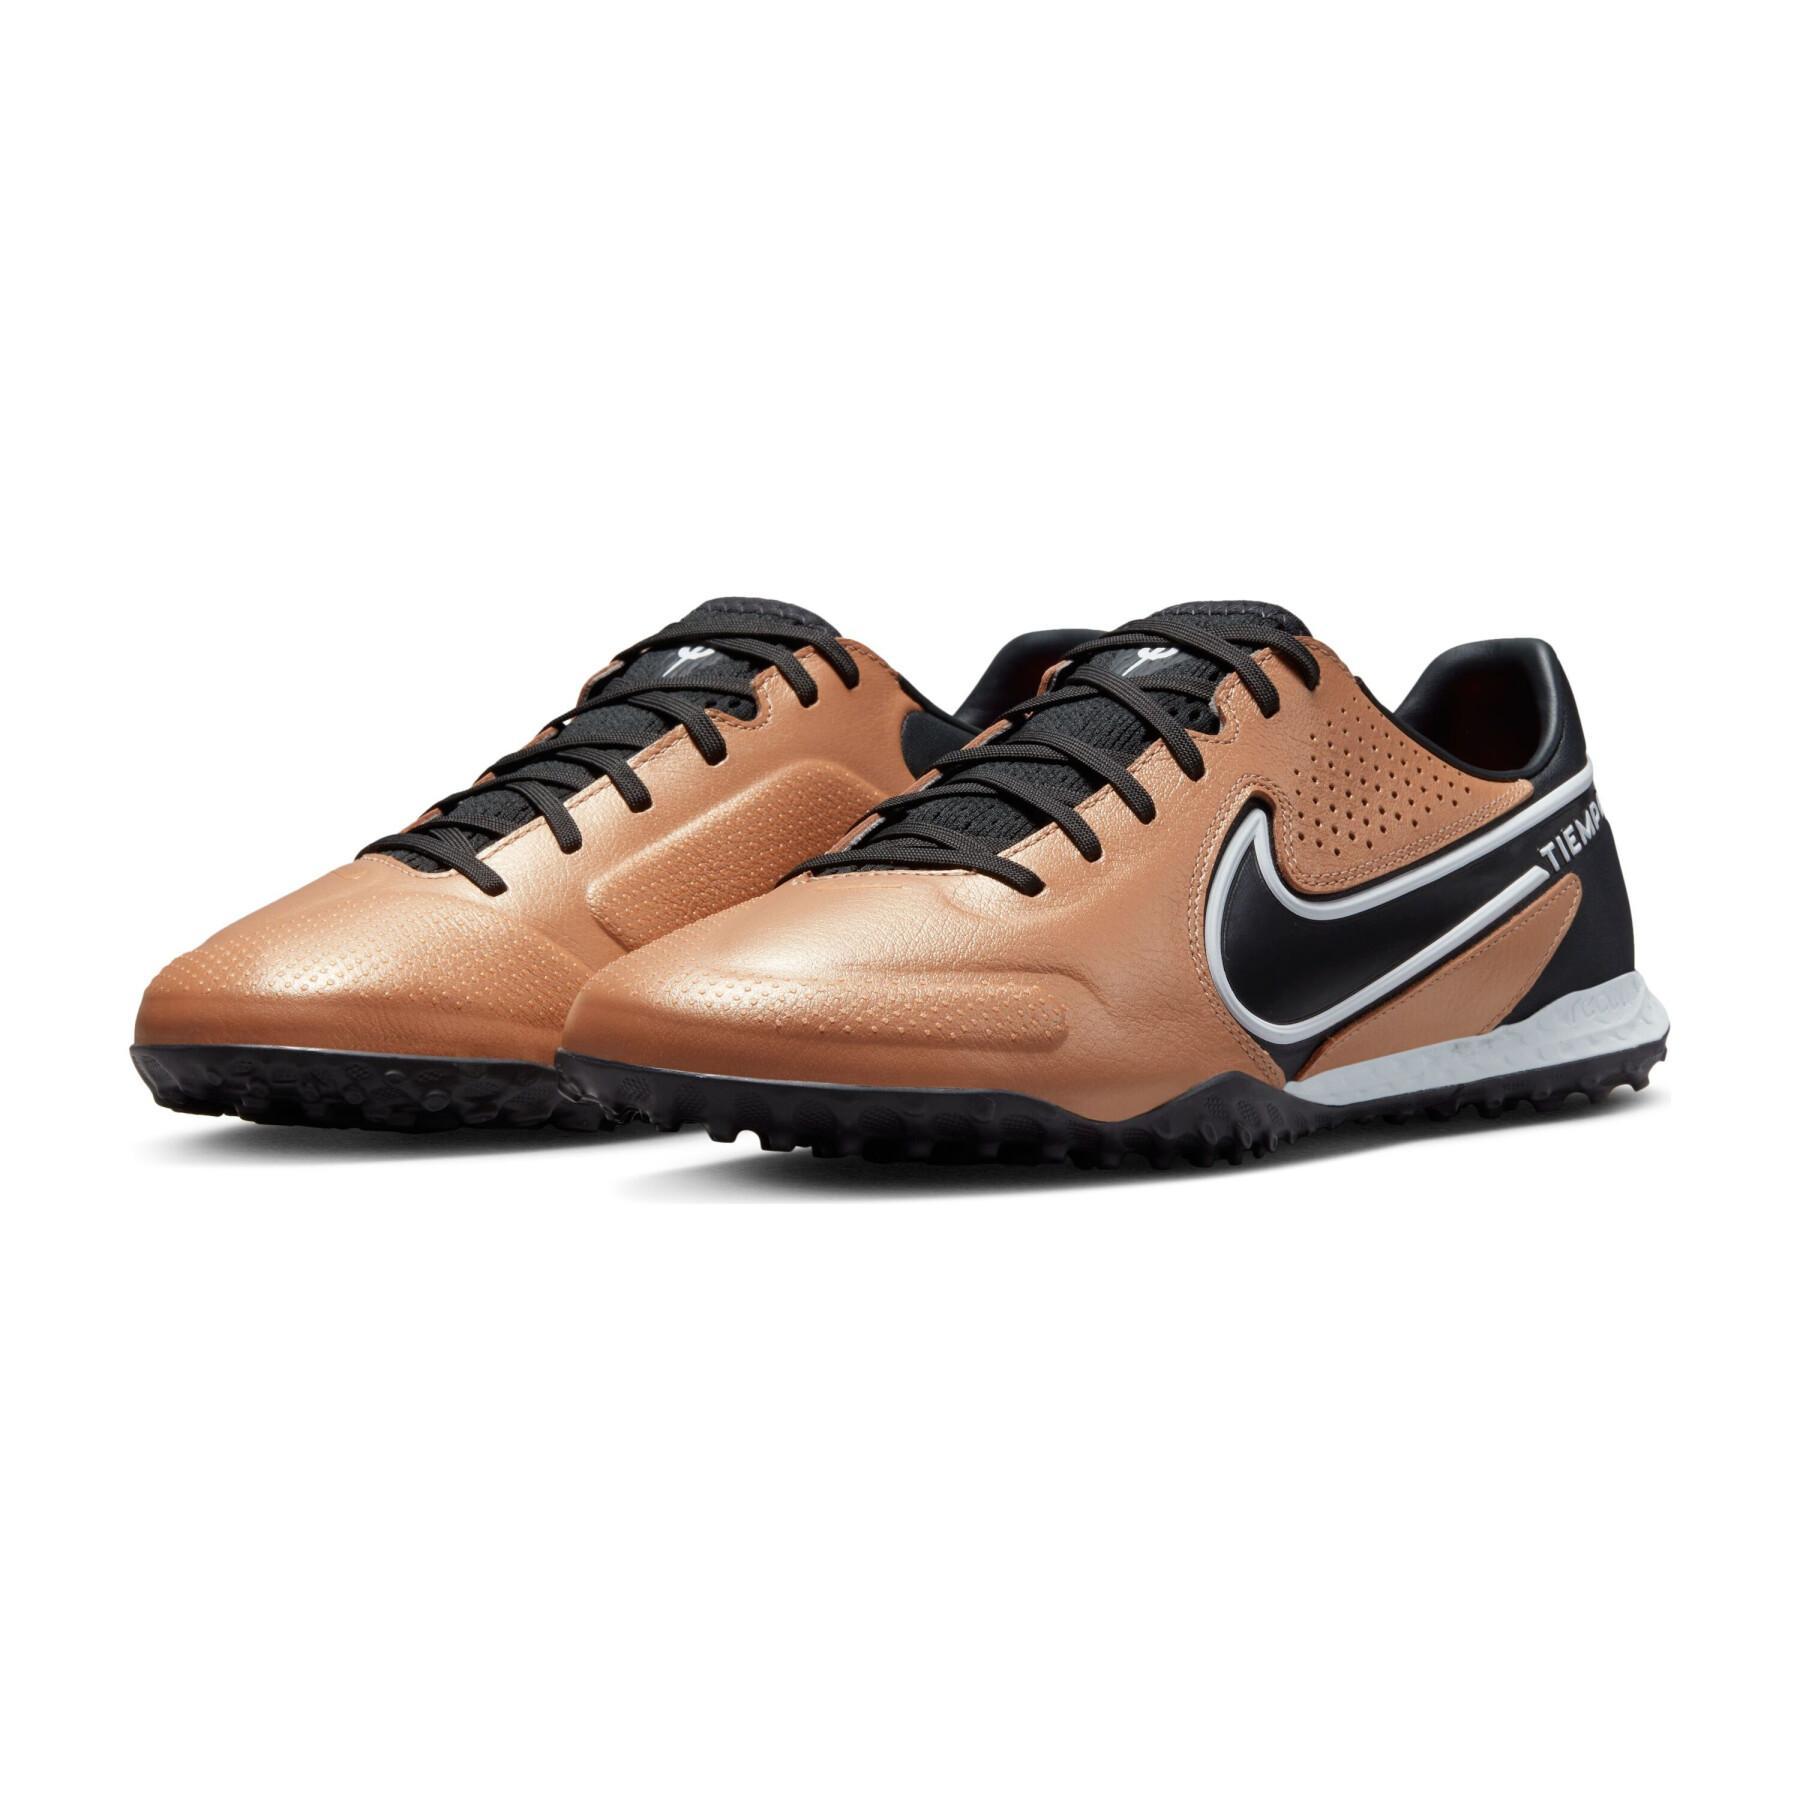 Soccer shoes Nike React Tiempo Legend 9 Pro TF - Generation Pack